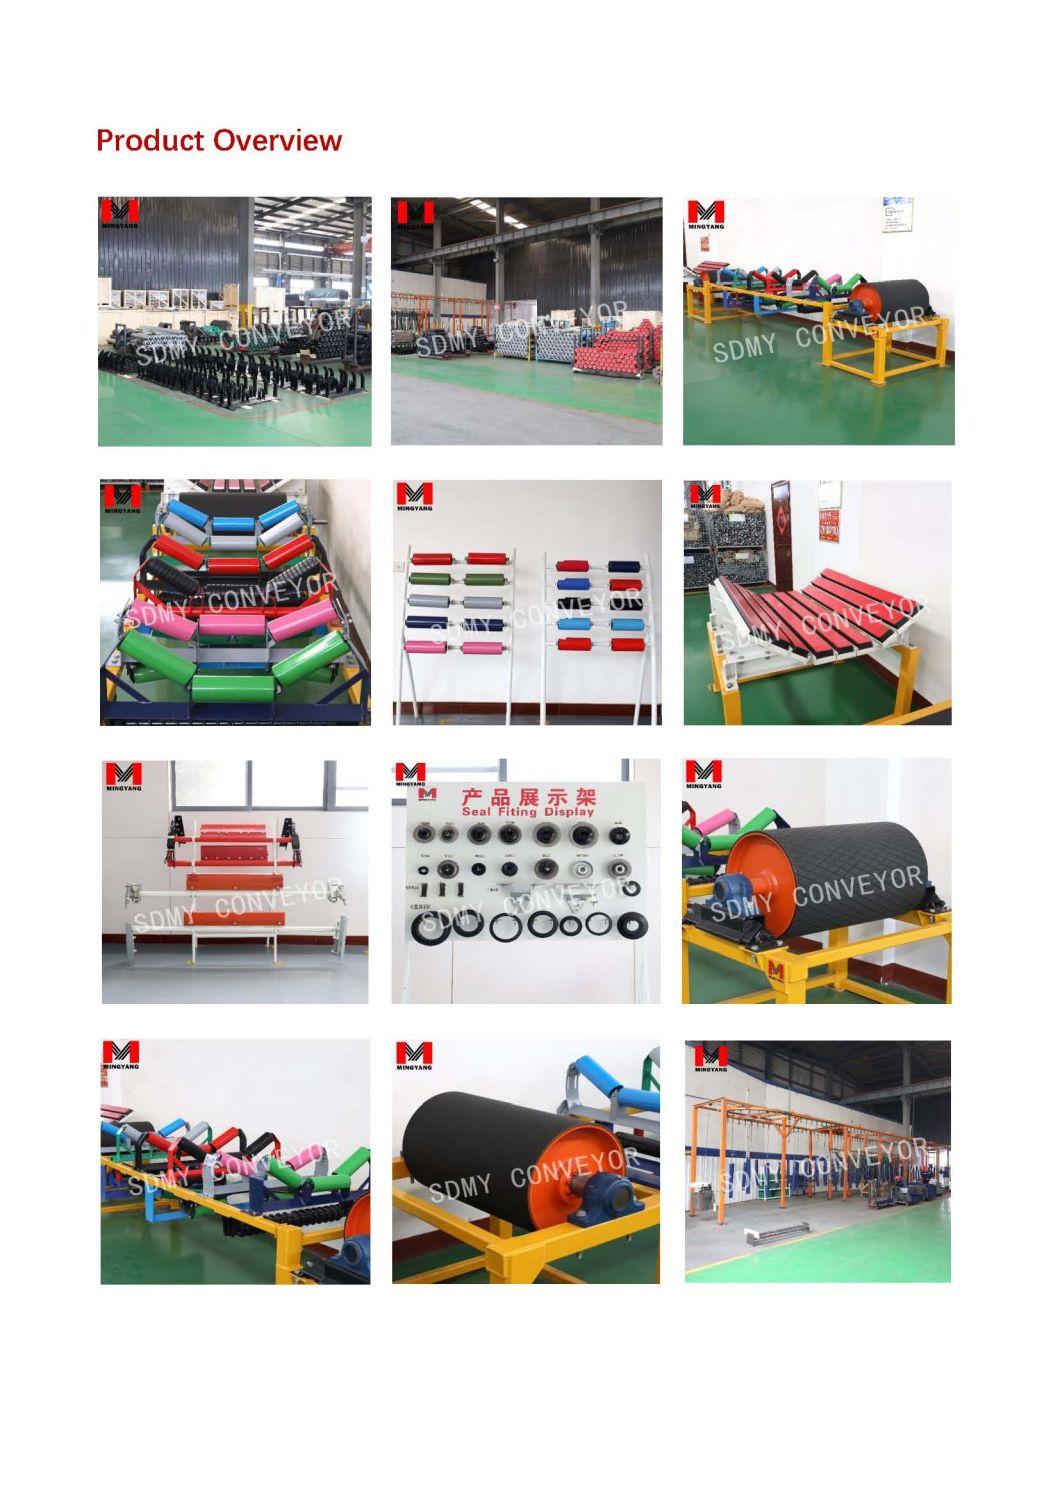 Garland Idler Garland Roller with Best Price for Exporting